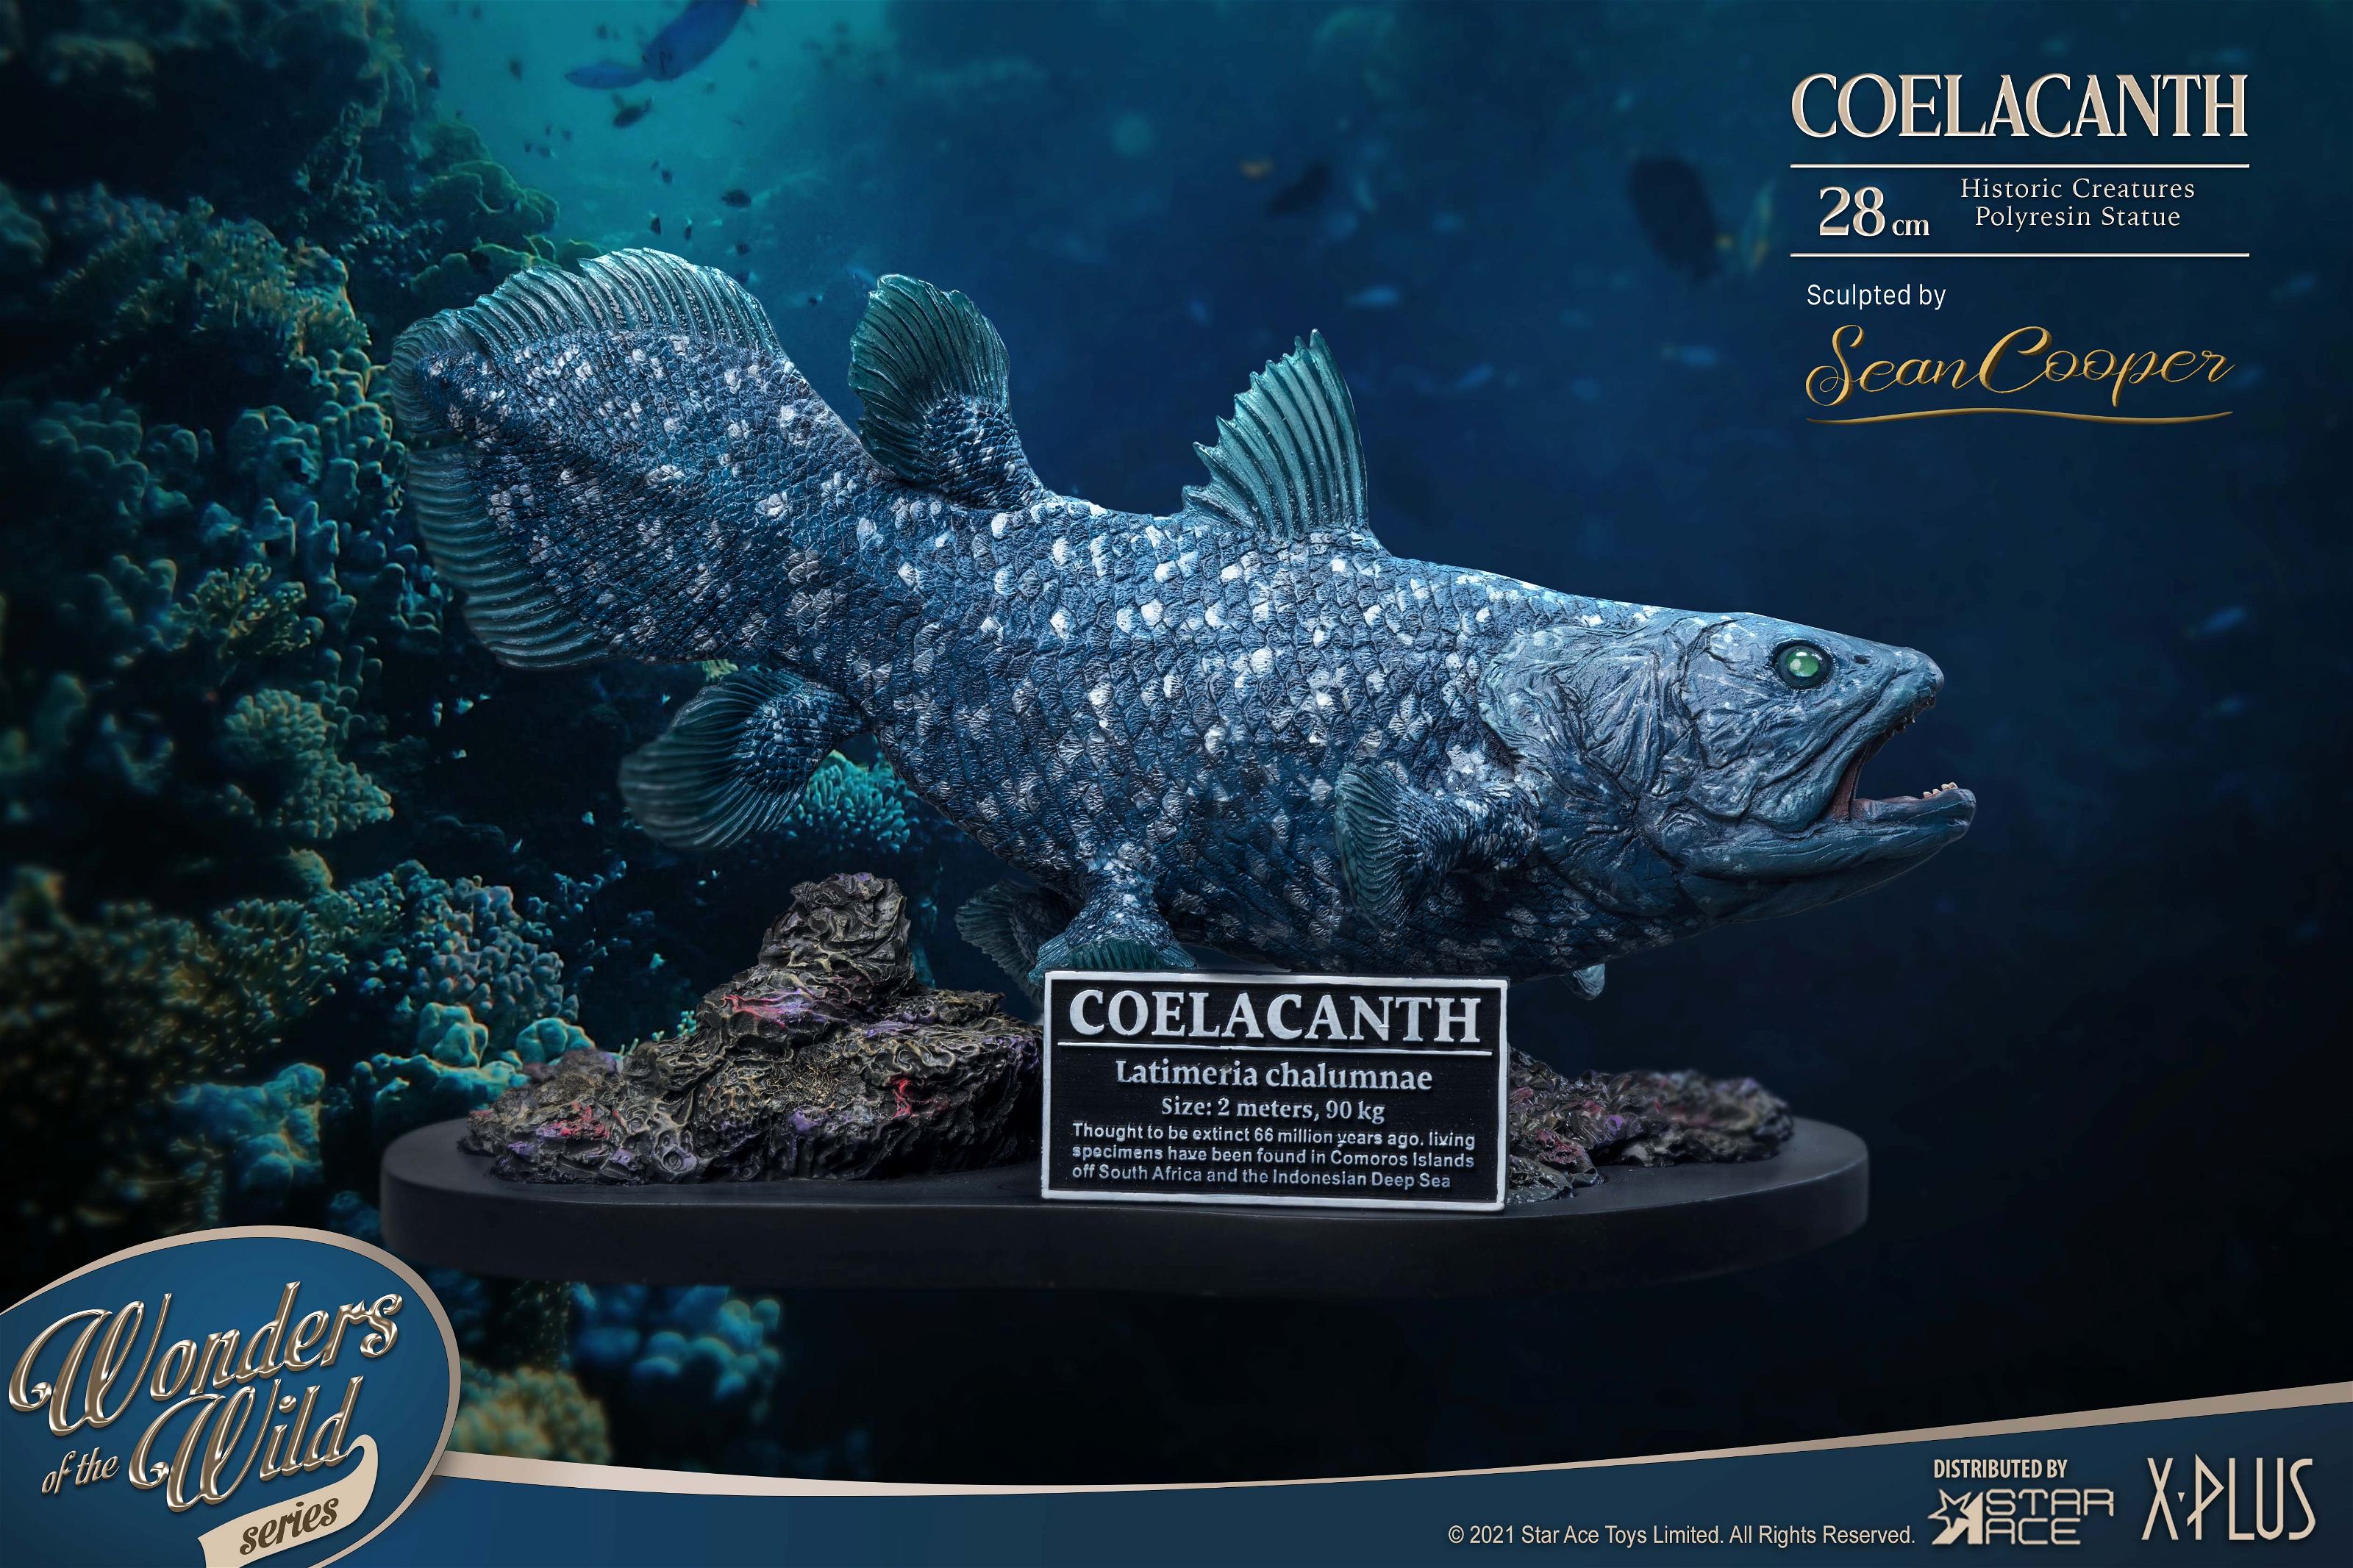 Wonders of the Wild Series: Coelacanth Polyresin Statue Star Ace Toys, X-Plus